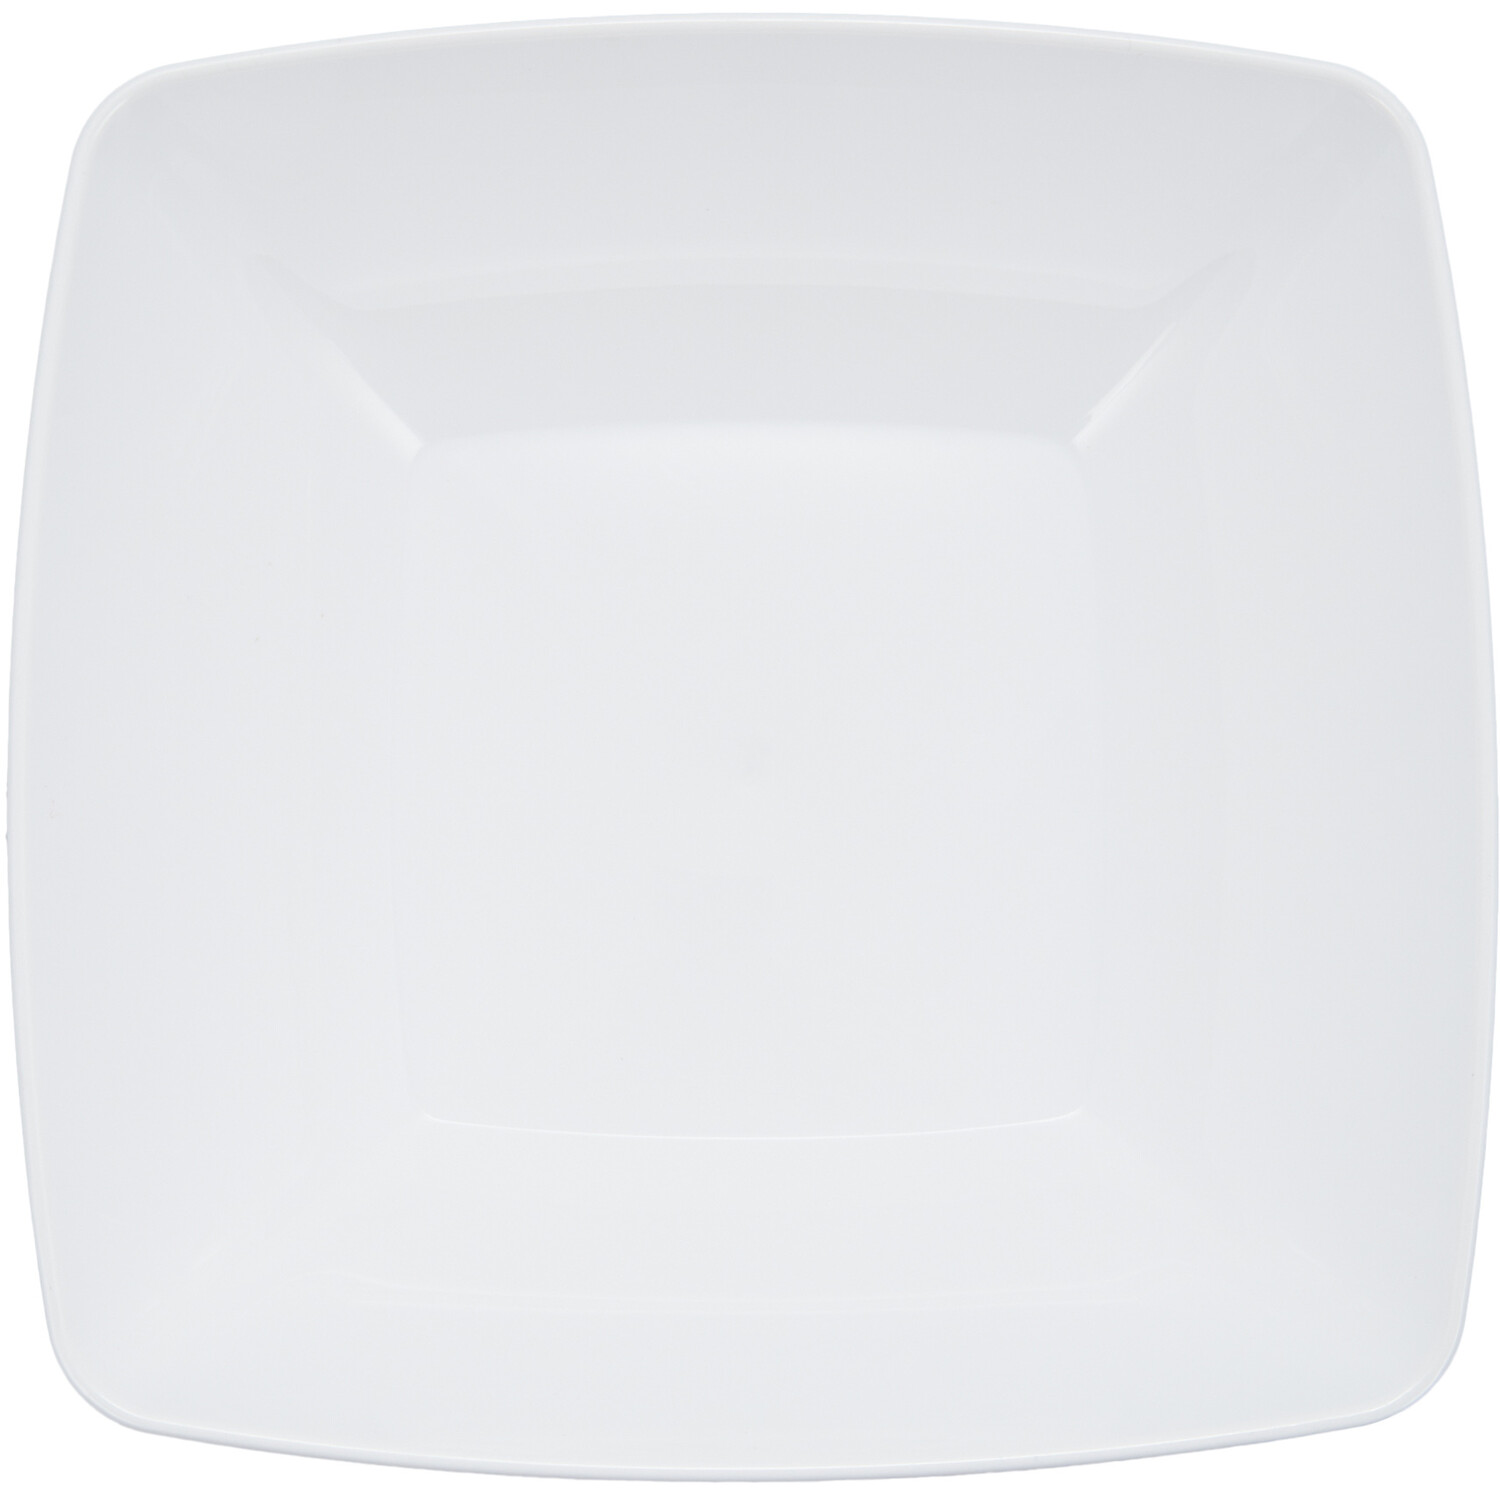 Pack of 2 My Home Square Bowls - White Image 4